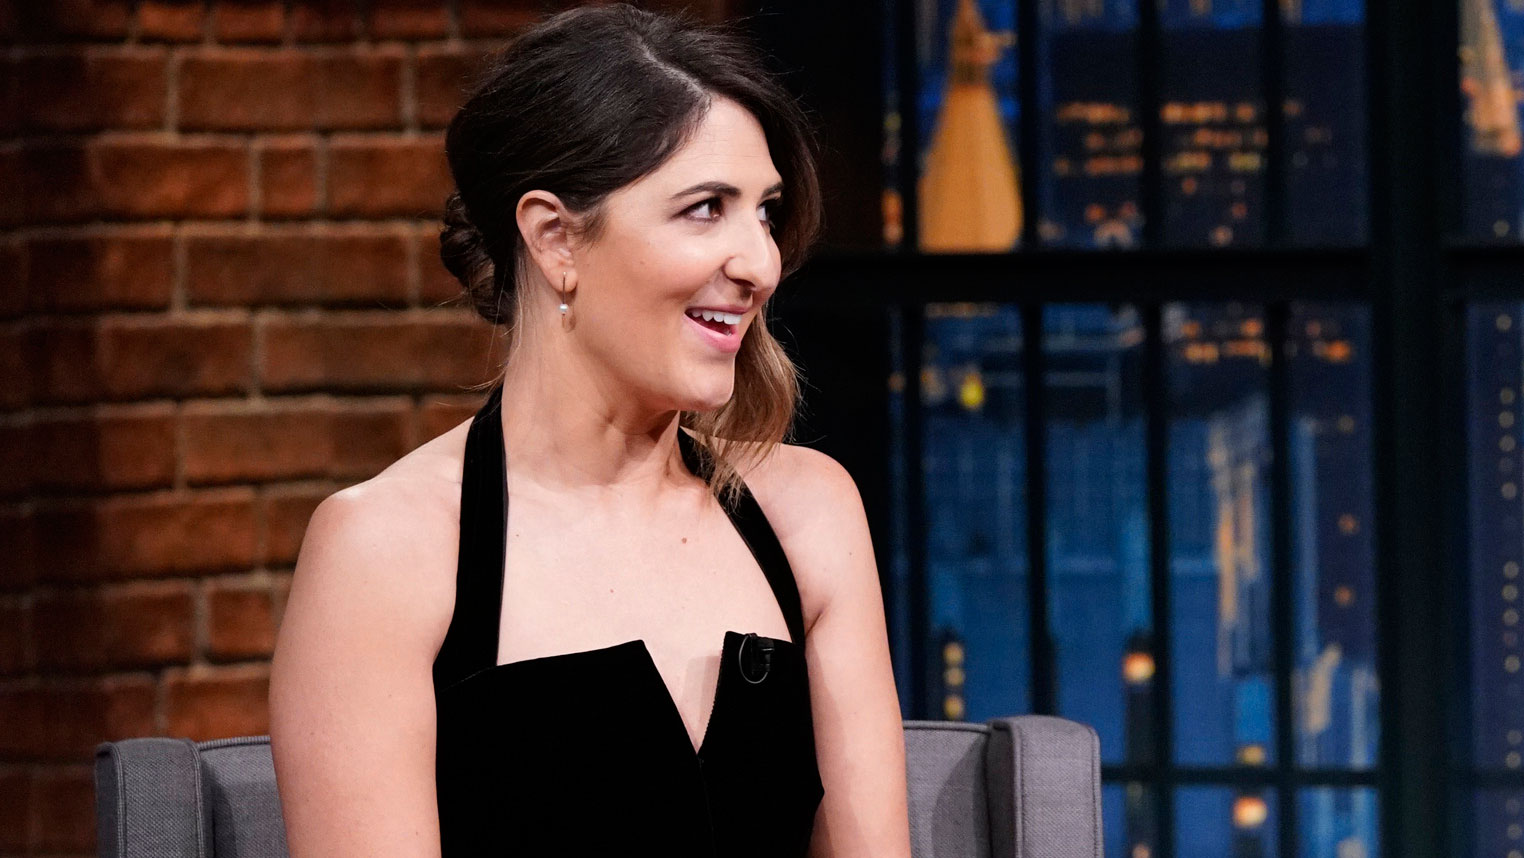 Watch Late Night with Seth Meyers Interview: D'Arcy Carden Talks About Impersonating ...1524 x 858